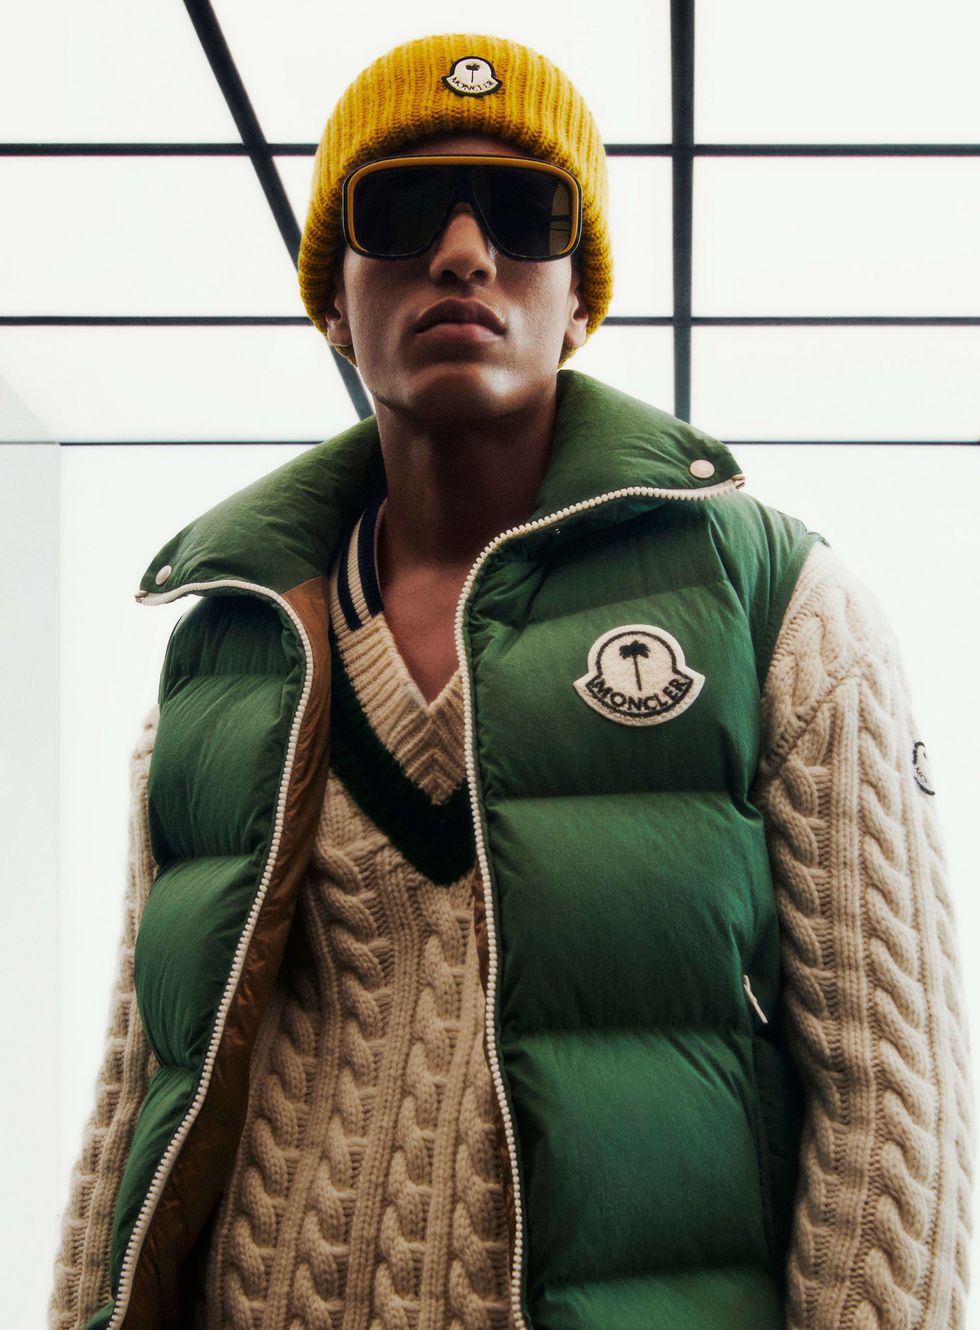 Moncler Launches A New Design-It-Yourself Service, Moncler By Me